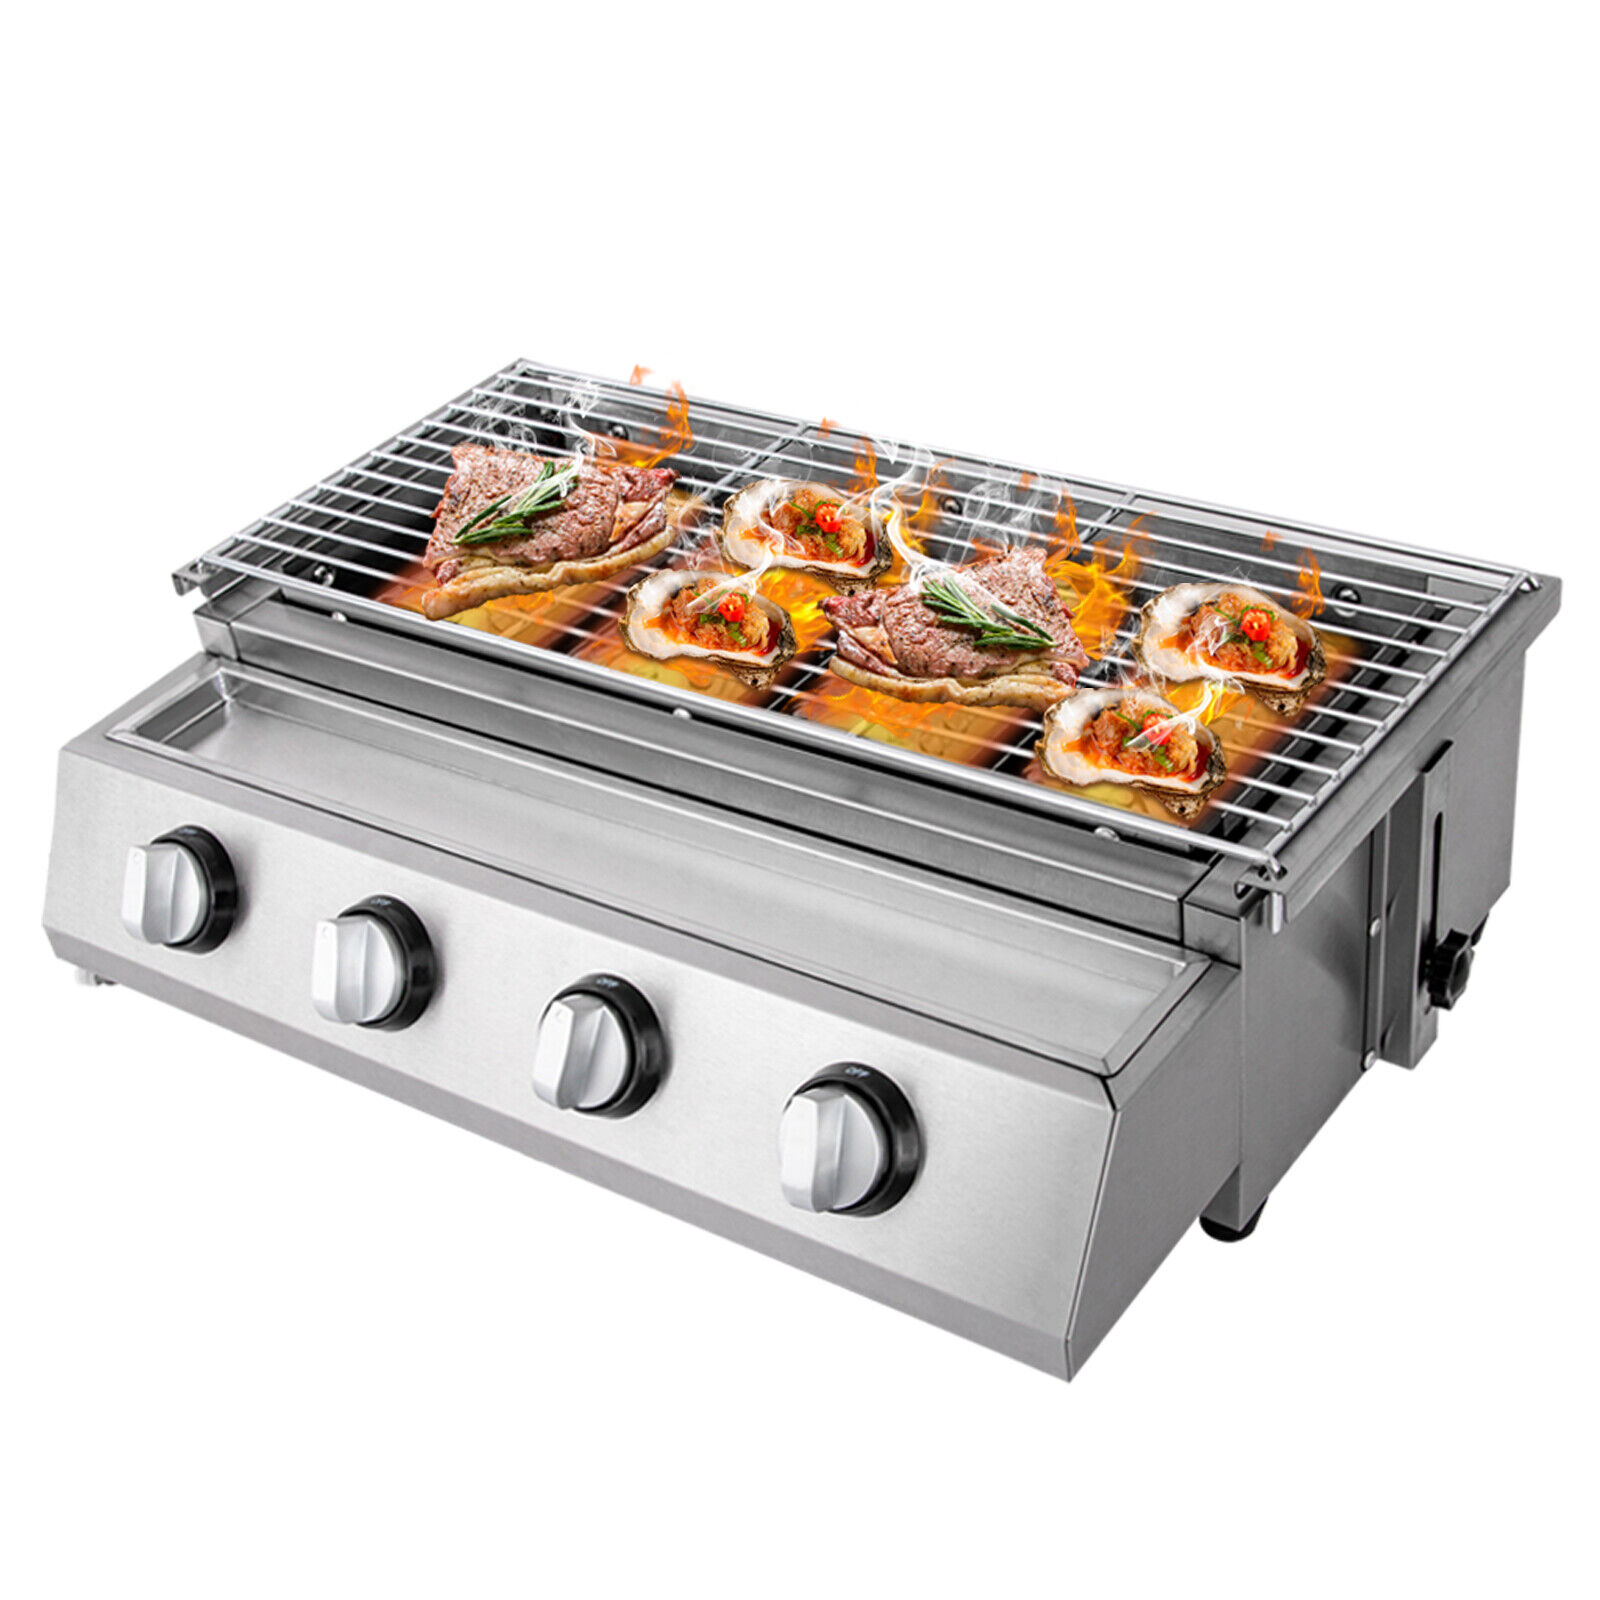 Miumaeov 4-Burner BBQ Propane Gas Grill 21.9 Inch Stainless Steel Barbecue Camping Grill Portable Small Propane Grill Detachable BBQ Gas Grill Griddle Silver Patio Smokeless Grill with Steel Hood - image 1 of 12